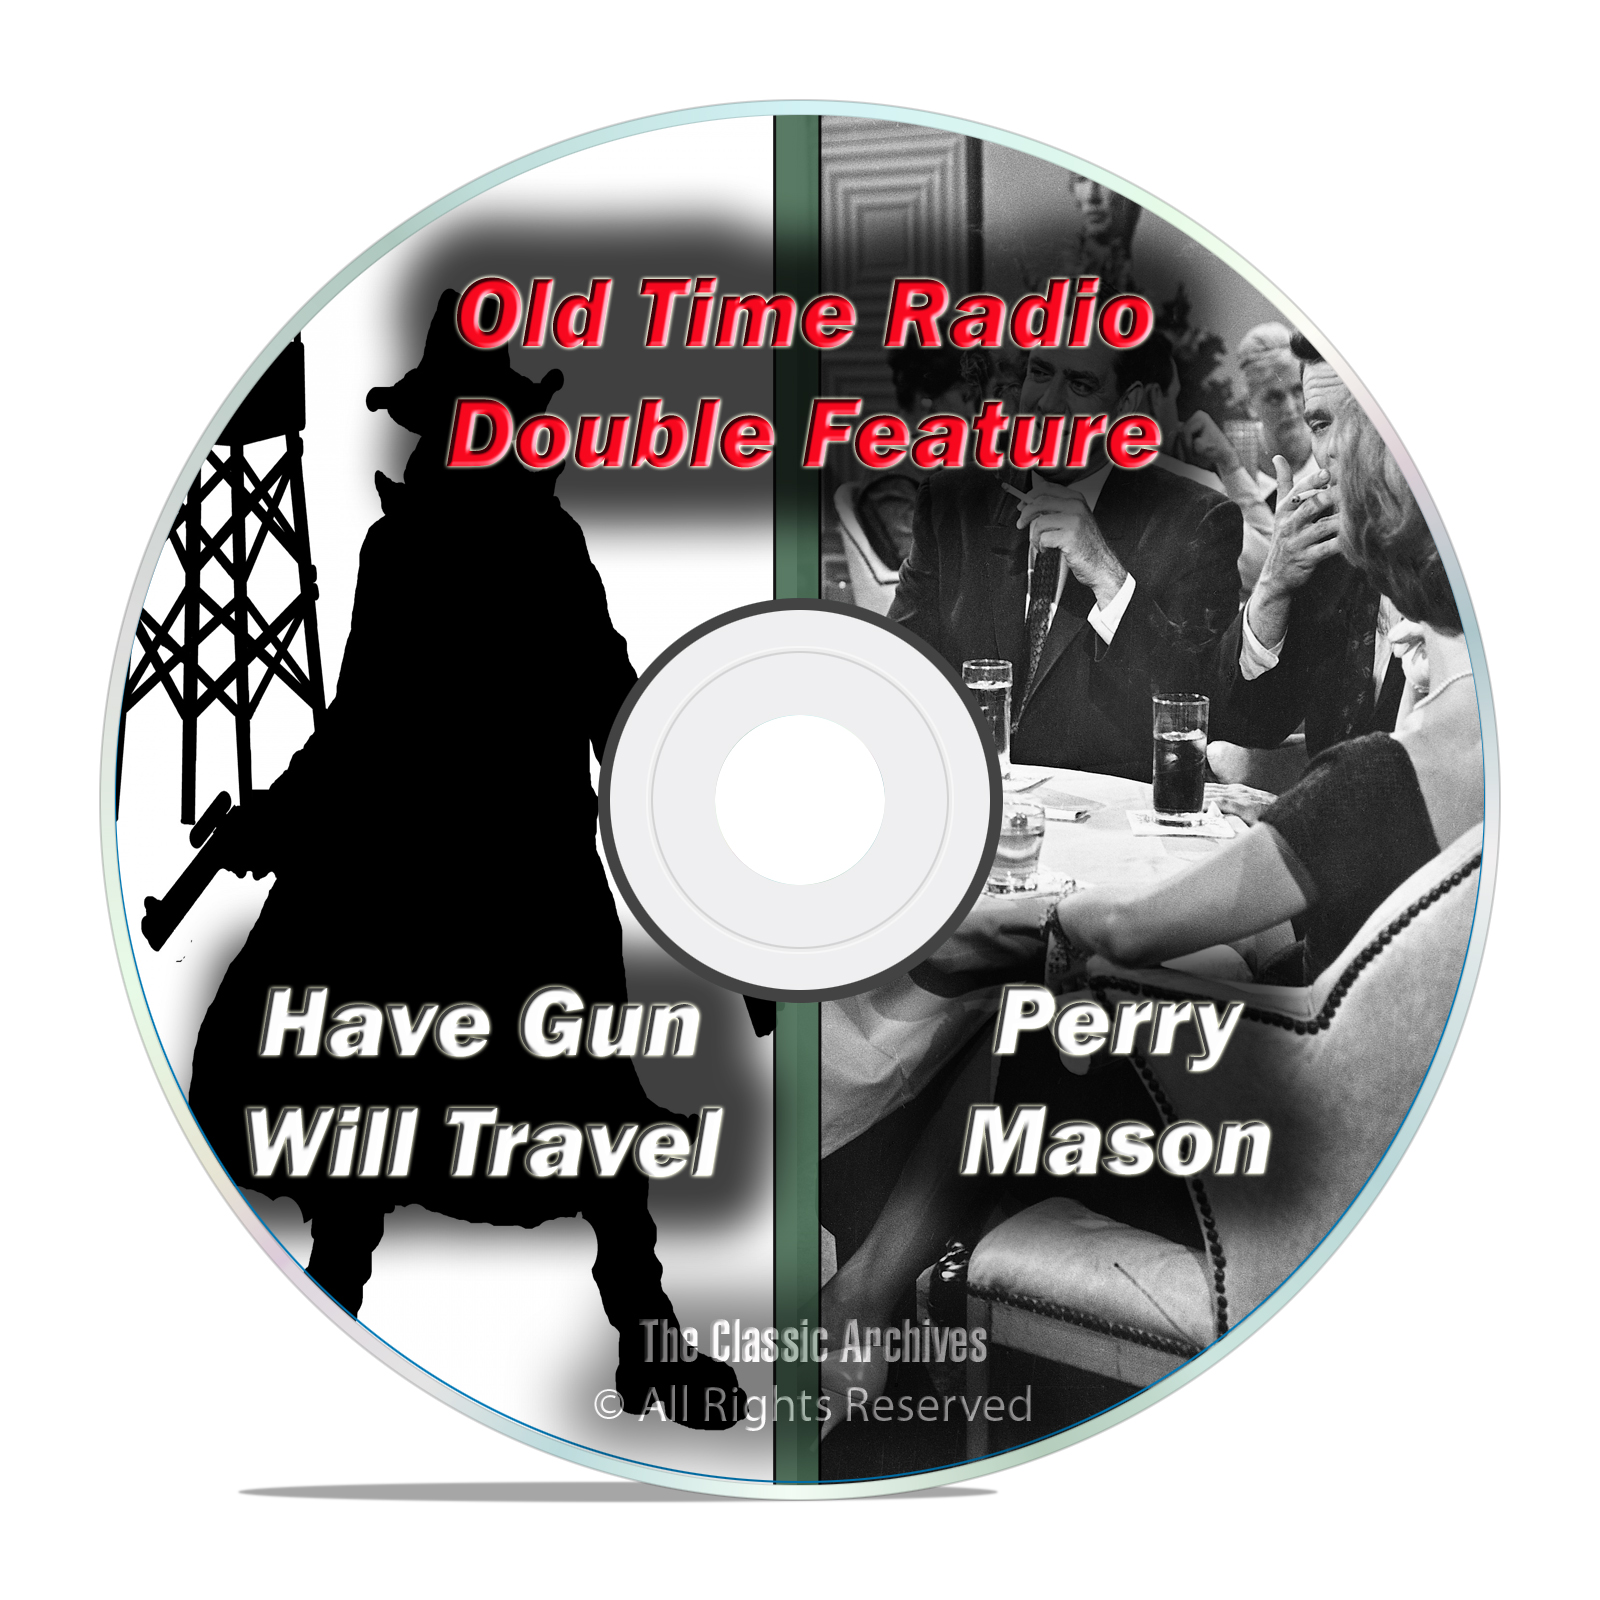 PERRY MASON + HAVE GUN WILL TRAVEL, 509 shows, FULL RUN, Old Time Radio DVD